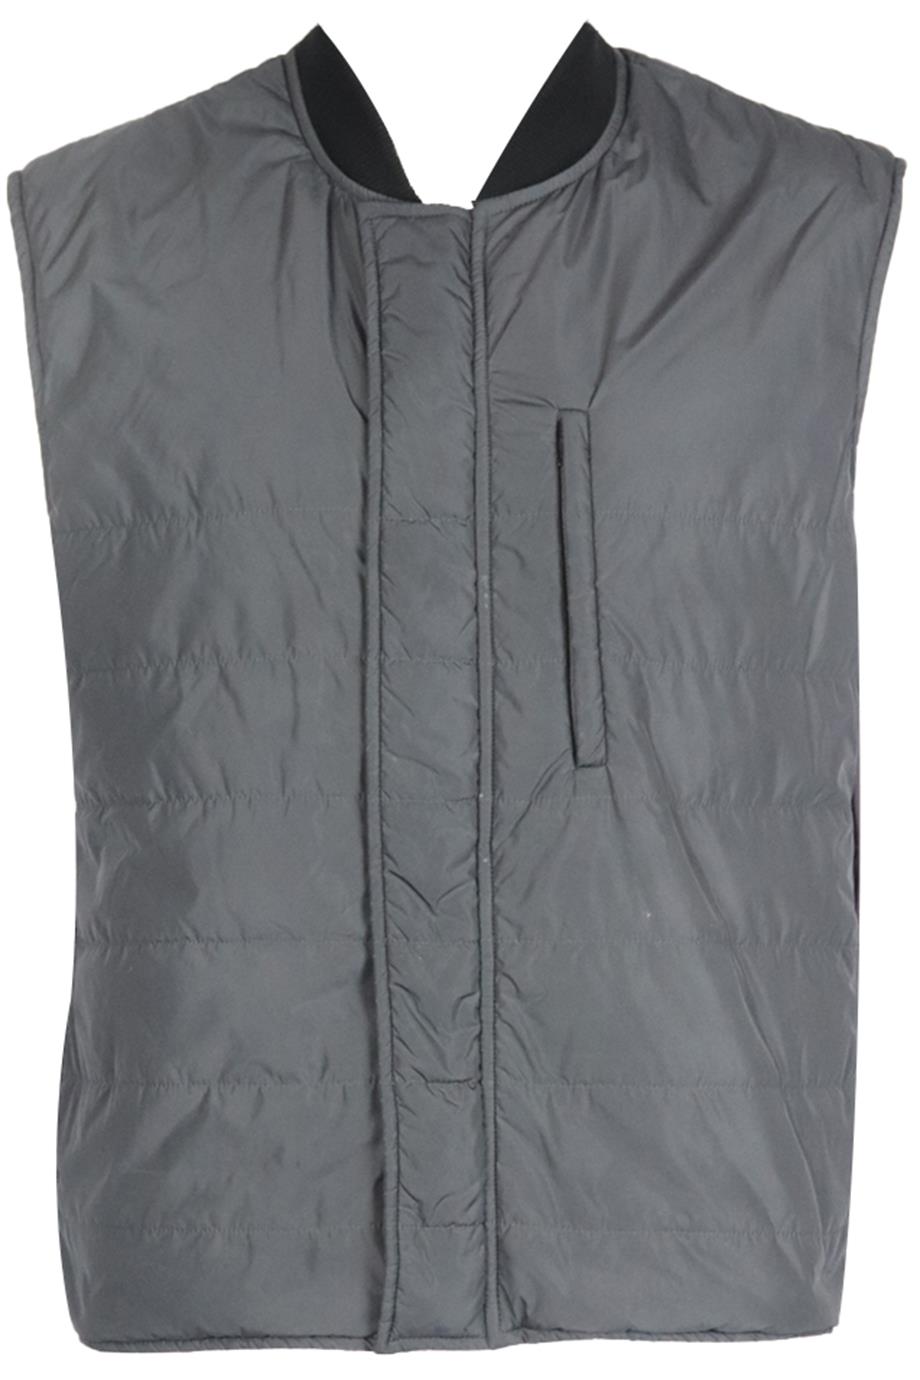 RILEY STUDIO MEN'S QUILTED PADDED SHELL GILET XSMALL